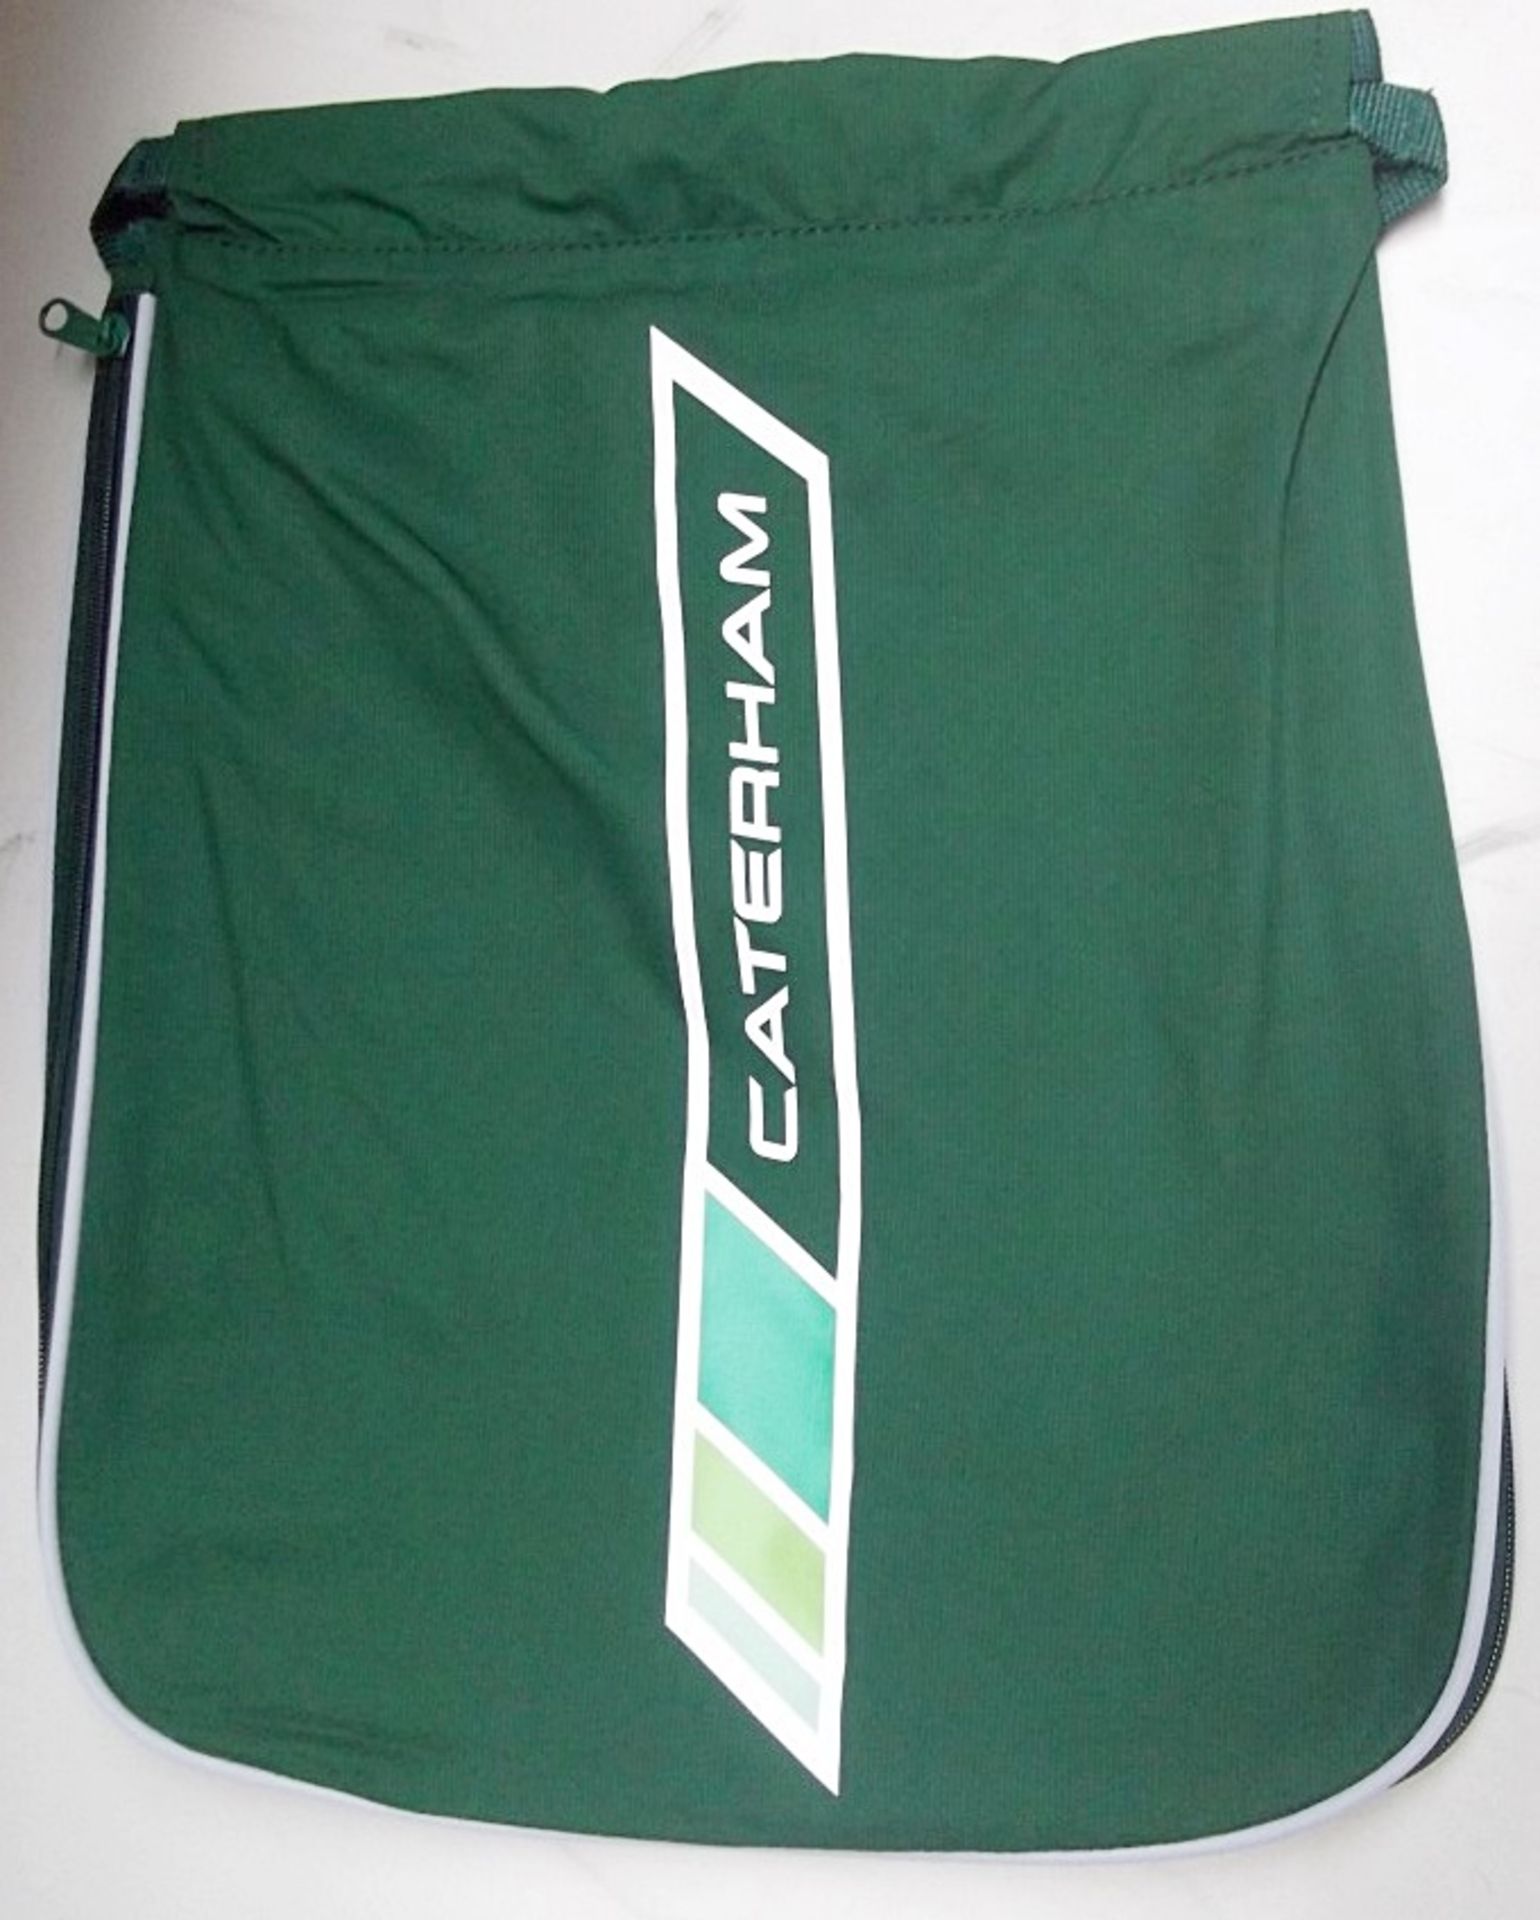 25 x CATERHAM F1 Nylon Backpacks - NEW & SEALED - Lined, With Dual Sholder Straps - CL155 - Ref: - Image 3 of 3